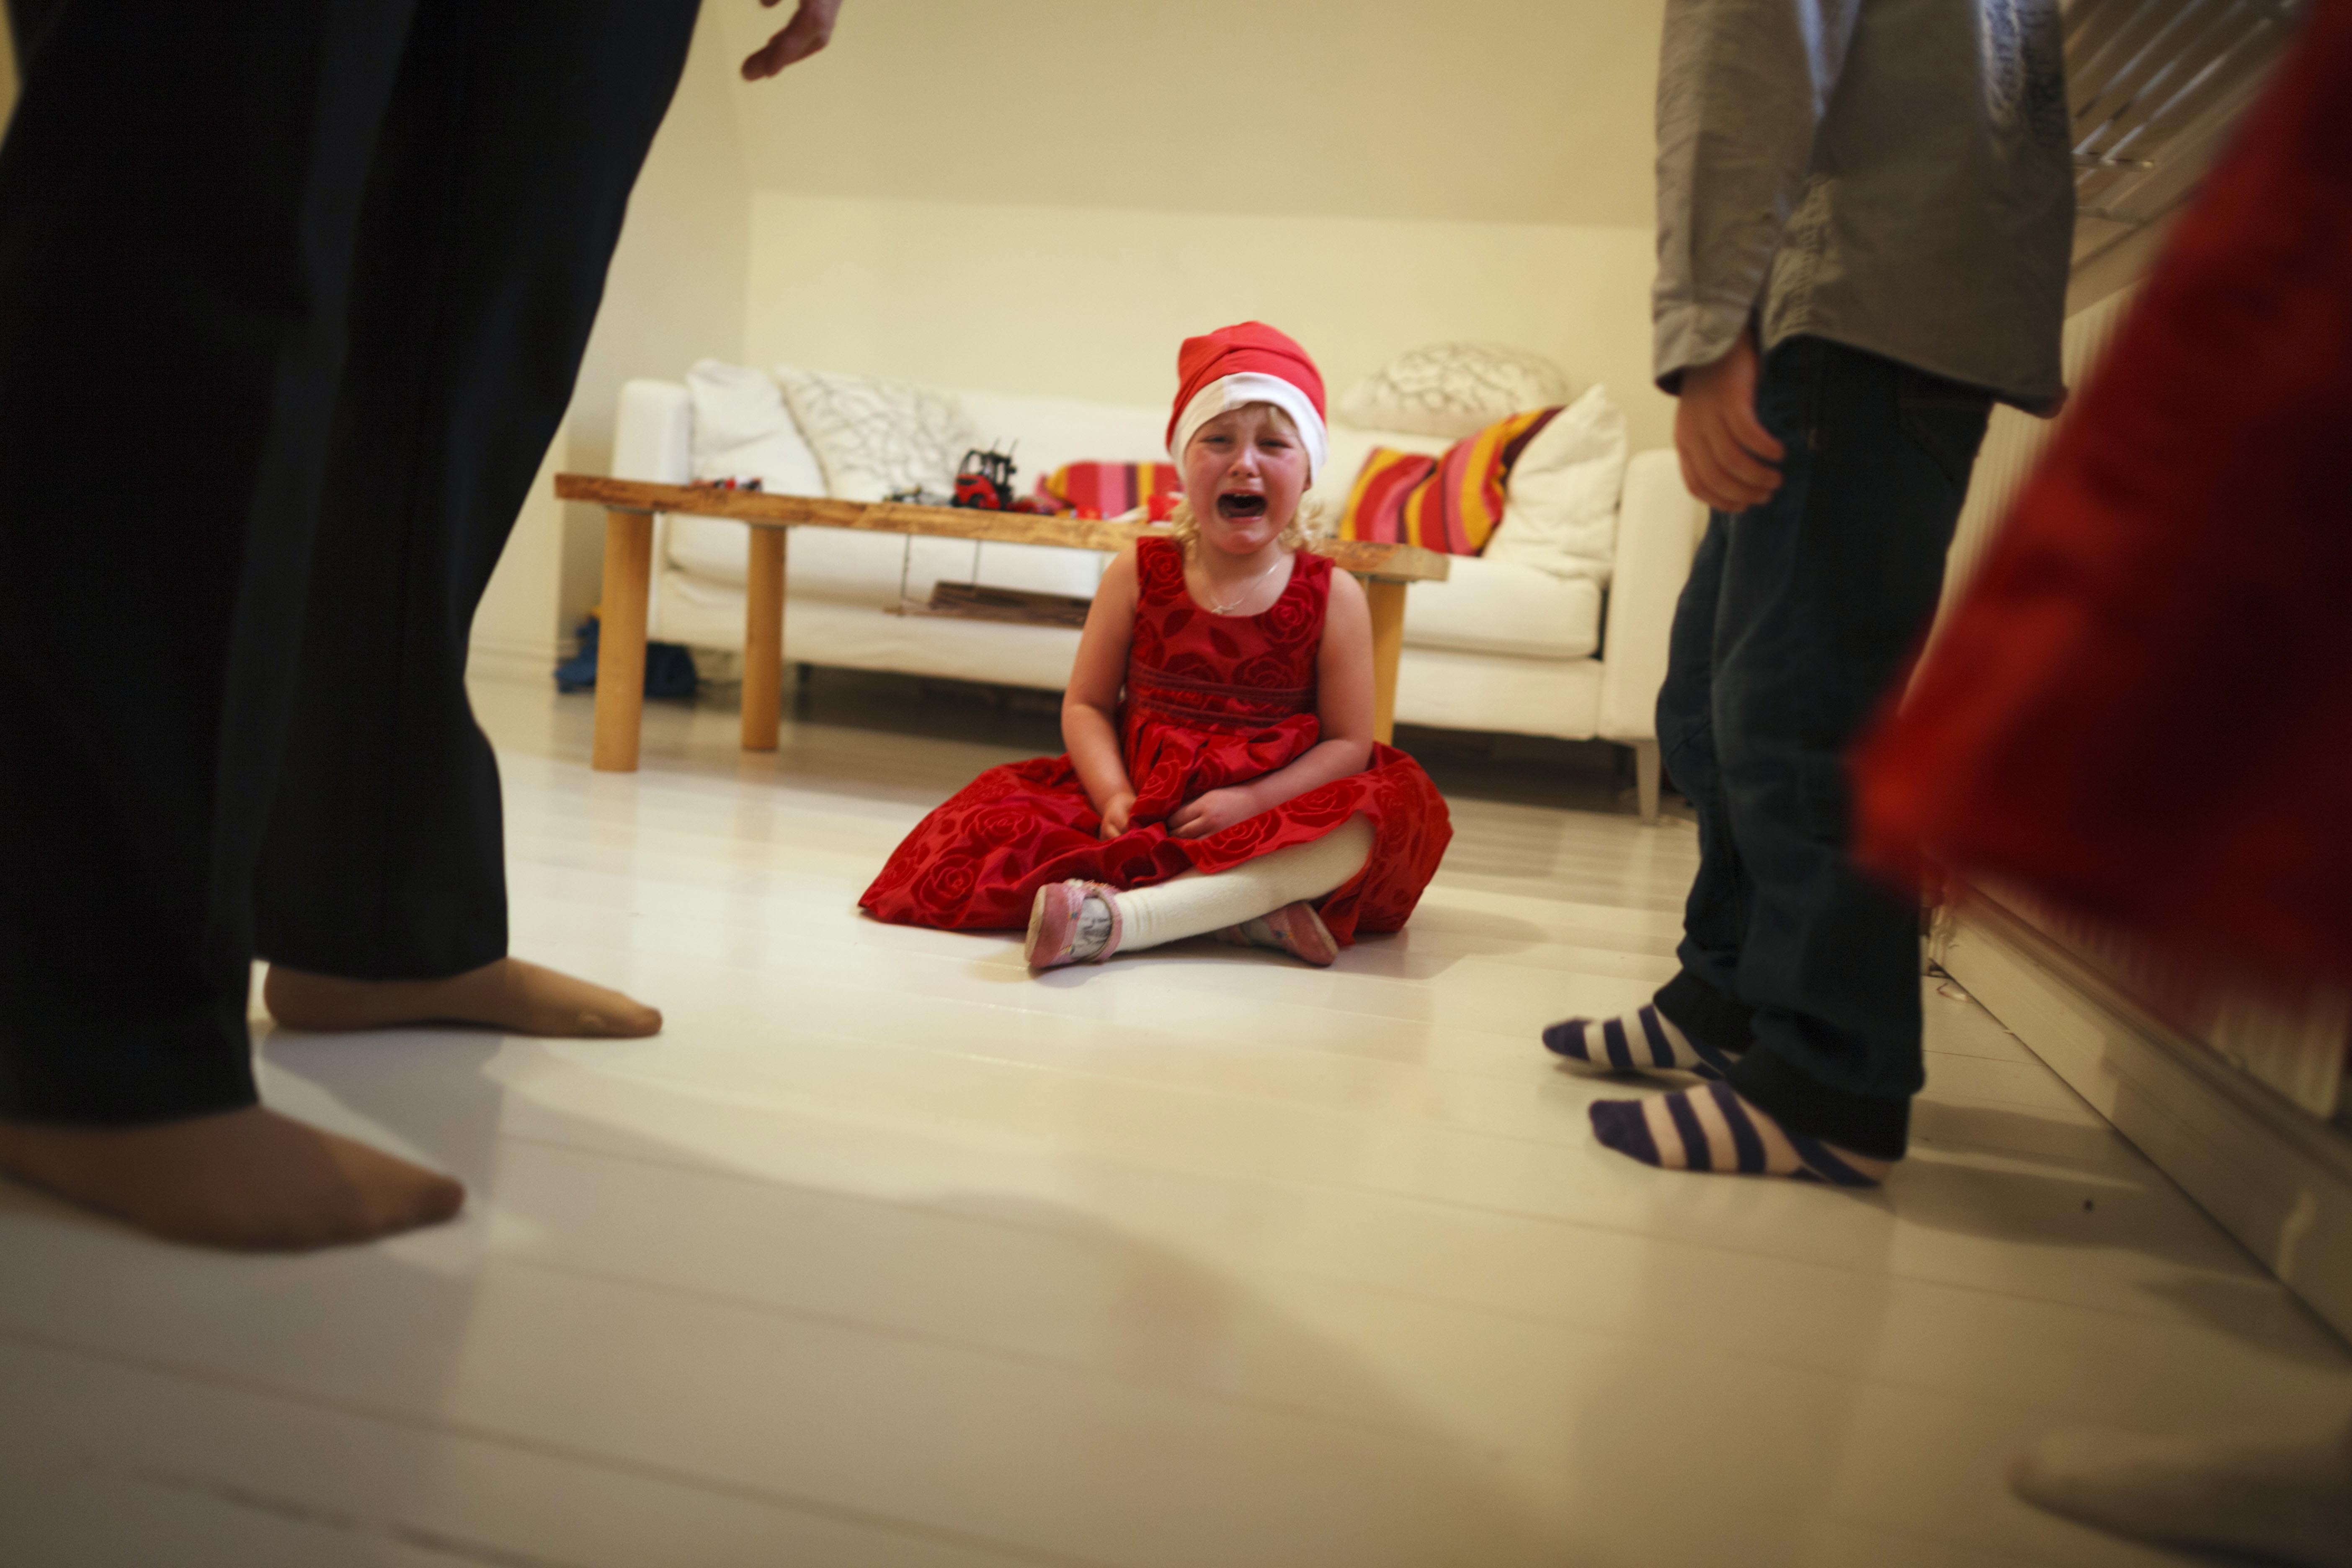 Young girl crying at Christmas | Source: Getty Images